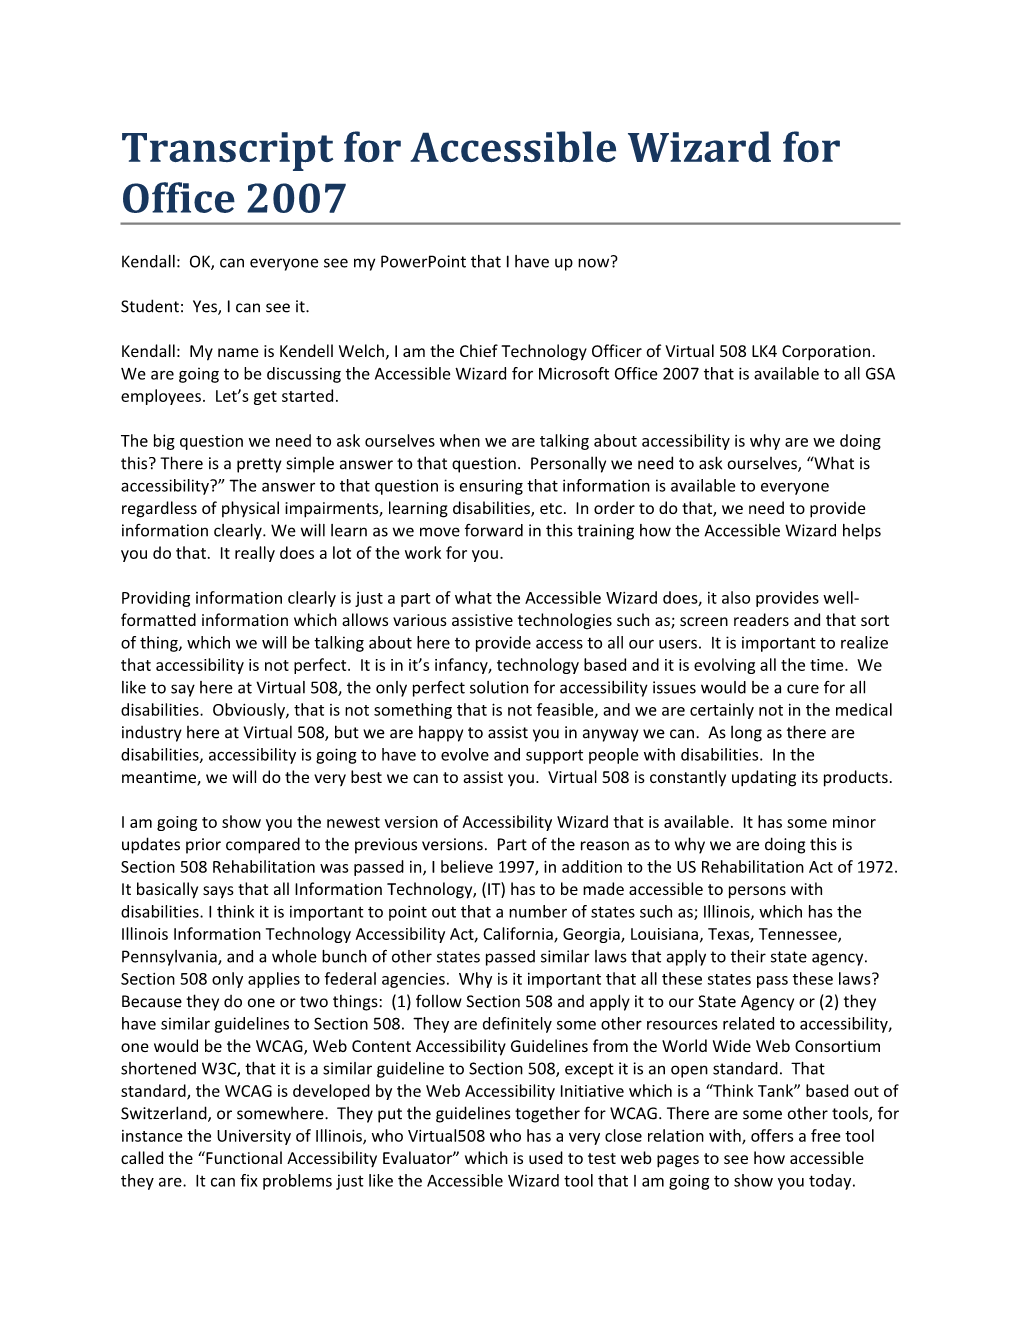 Transcript for Accessible Wizard for Office 2007